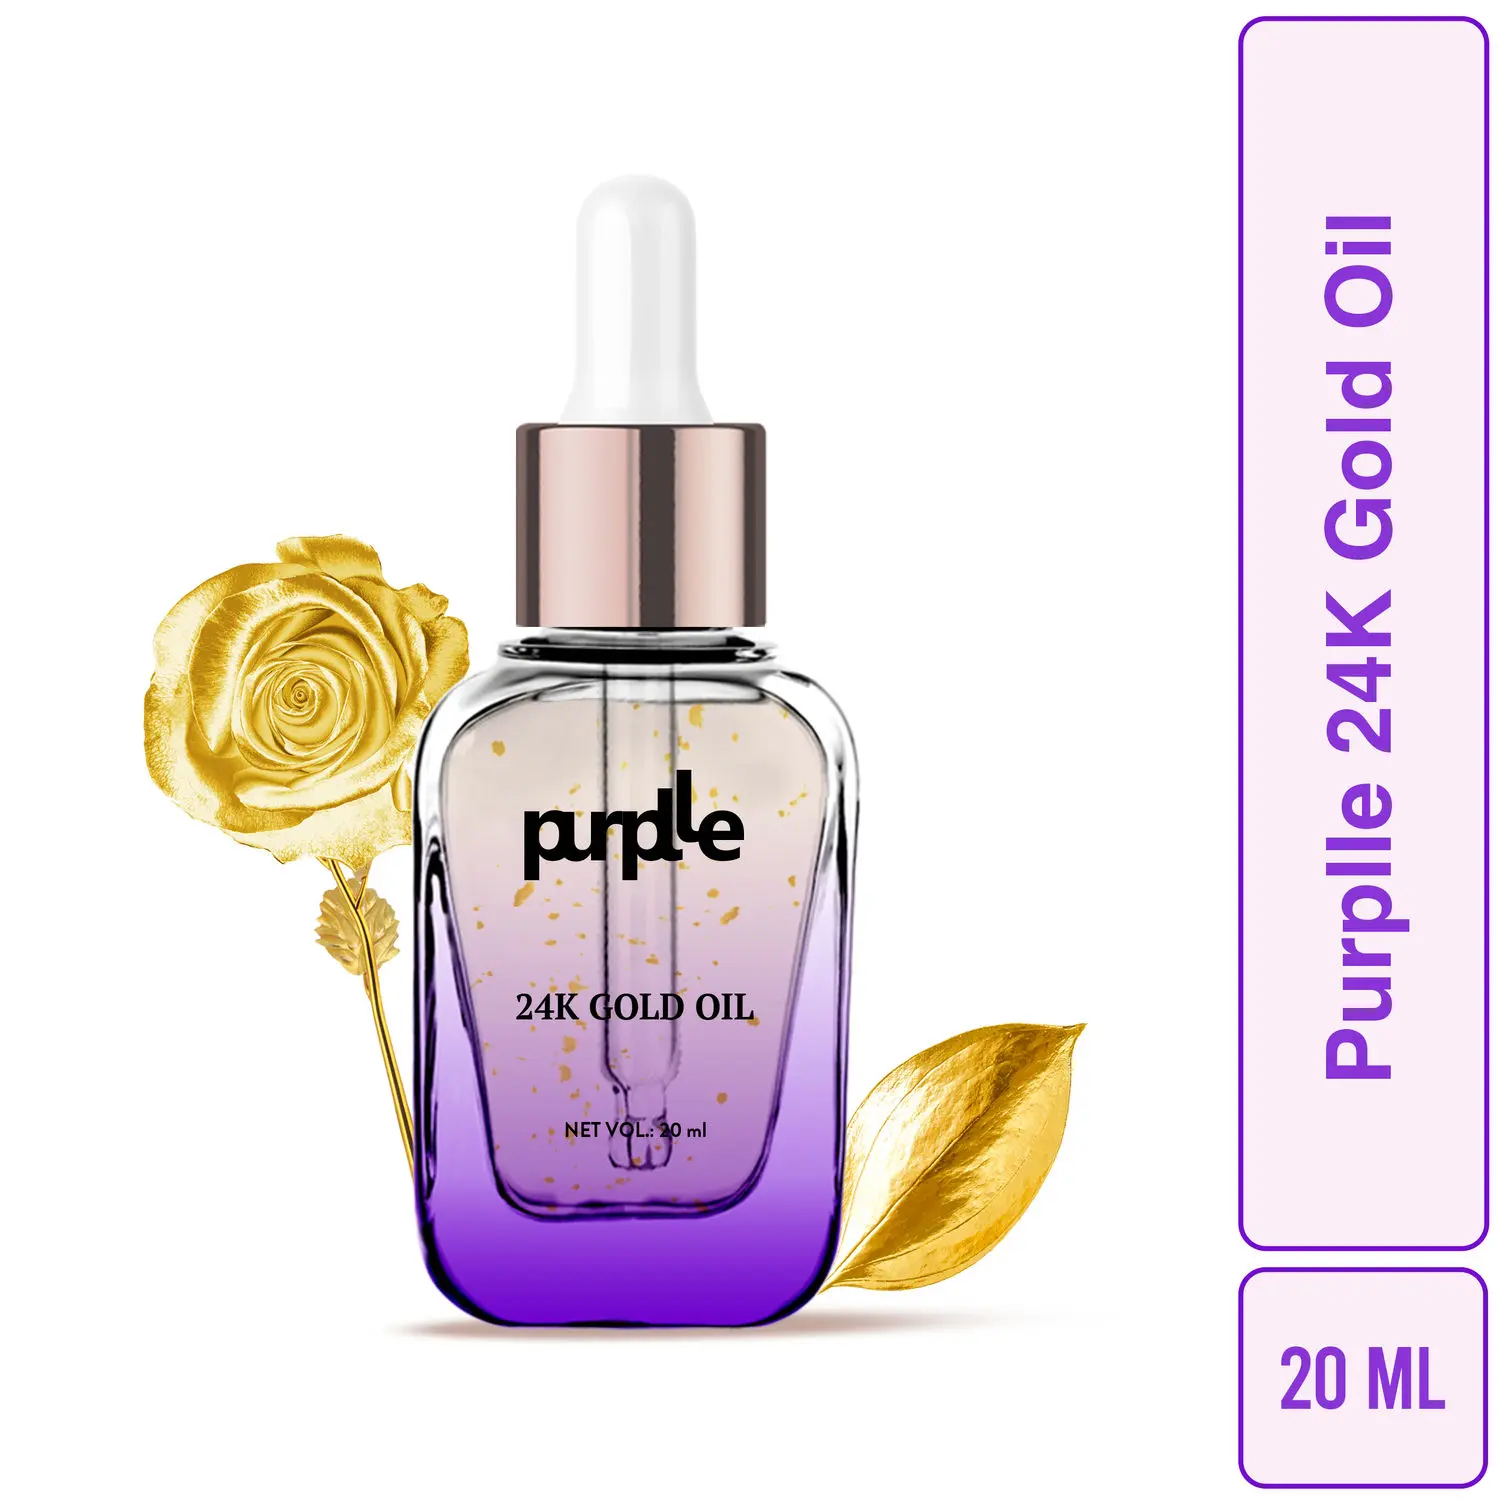 Purplle 24K Gold Oil | All Skin Types | Anti-Aging | Brightening | Diminishes Scarring | Hydrating | Quick Absorption (20 ml)